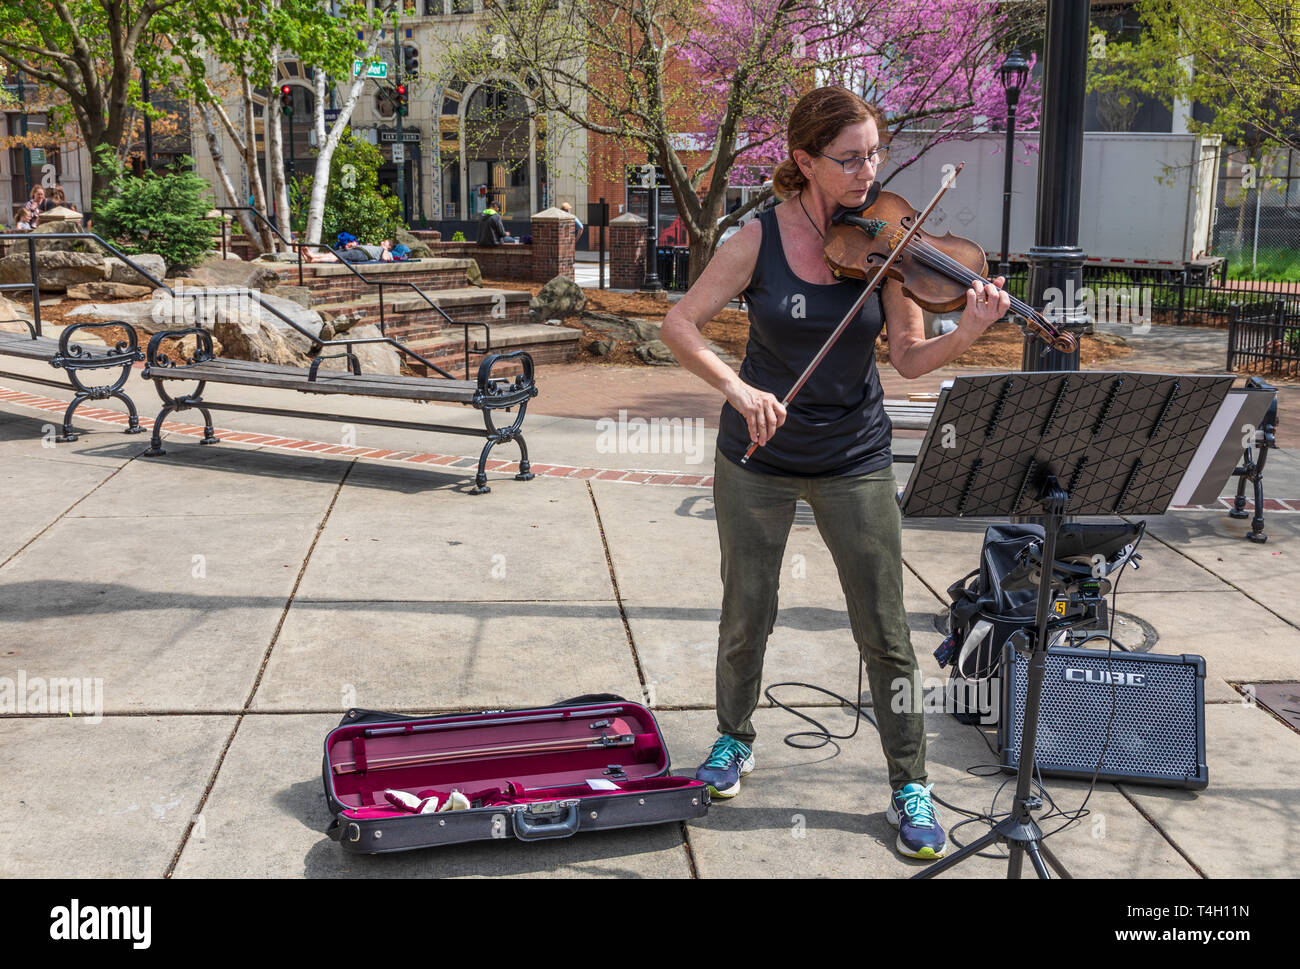 ASHEVILLE, NC, USA-4/11/19: A busker plays a violin (fiddle) in a downtown park on a sunny early spring day. Stock Photo